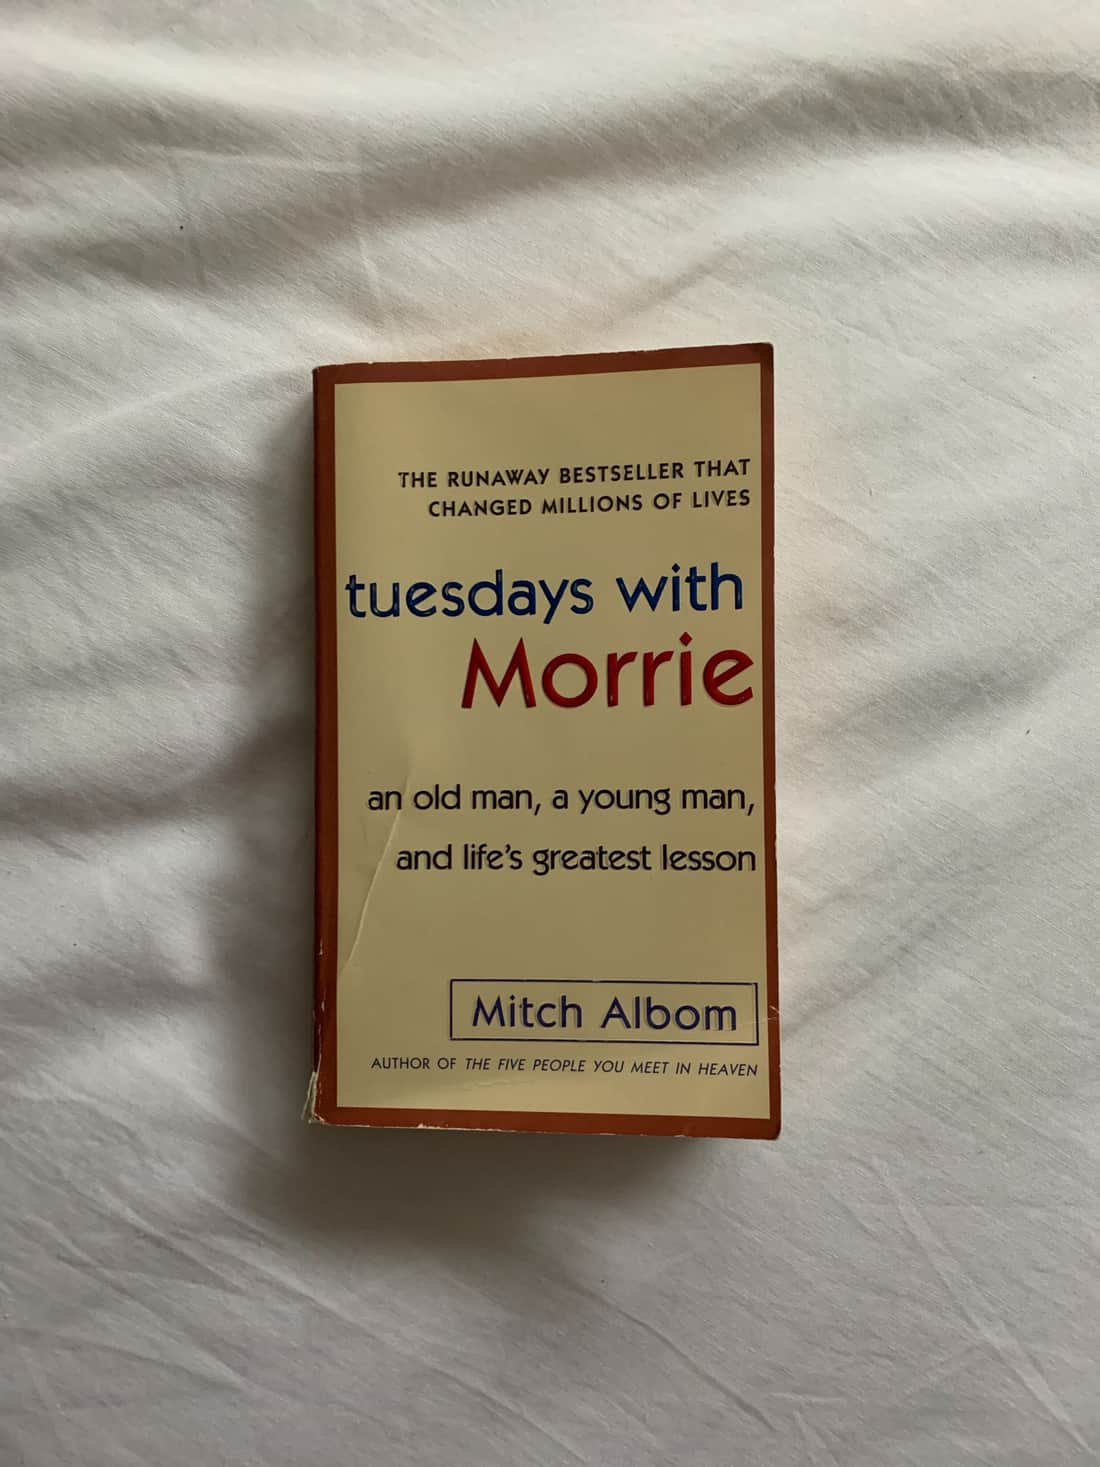 Tuesdays with Morrie [Full Summary] of Key Ideas and Review